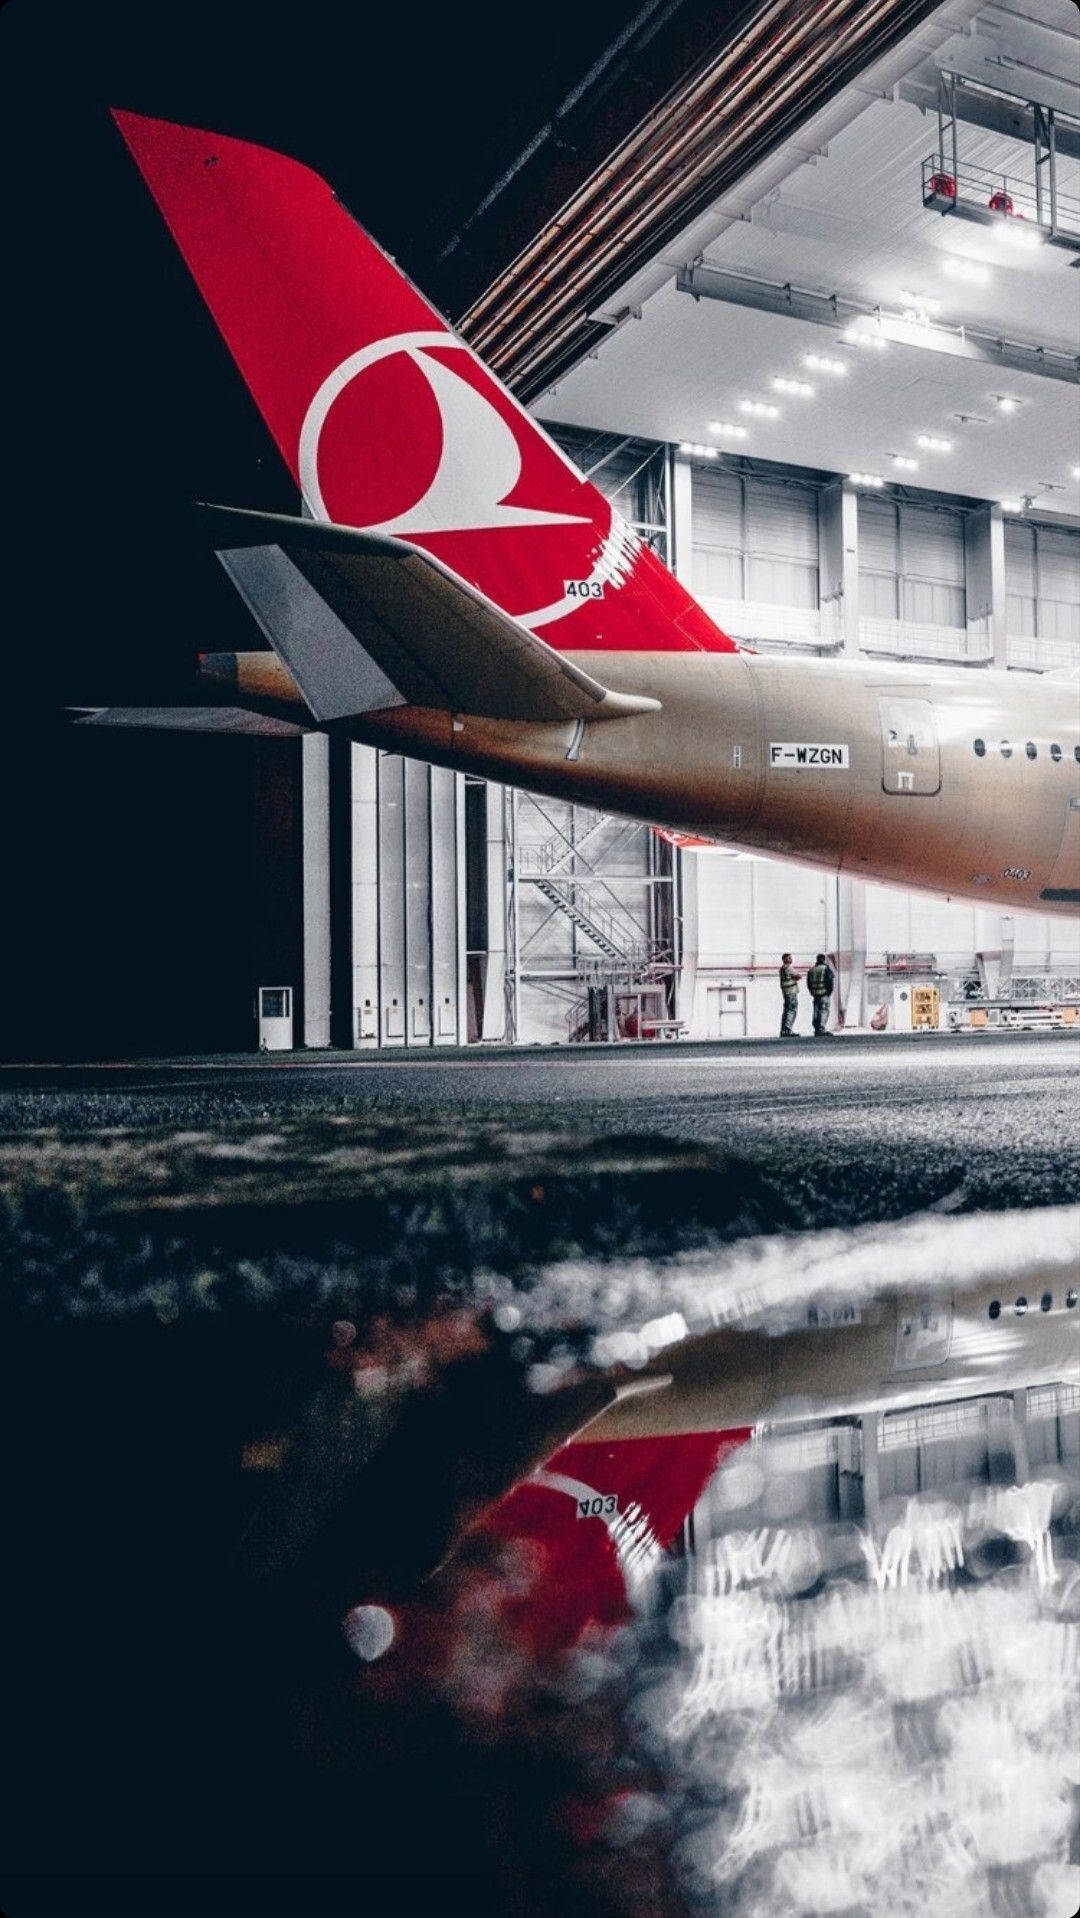 Turkish Airlines Airplane In A Hangar Wallpaper